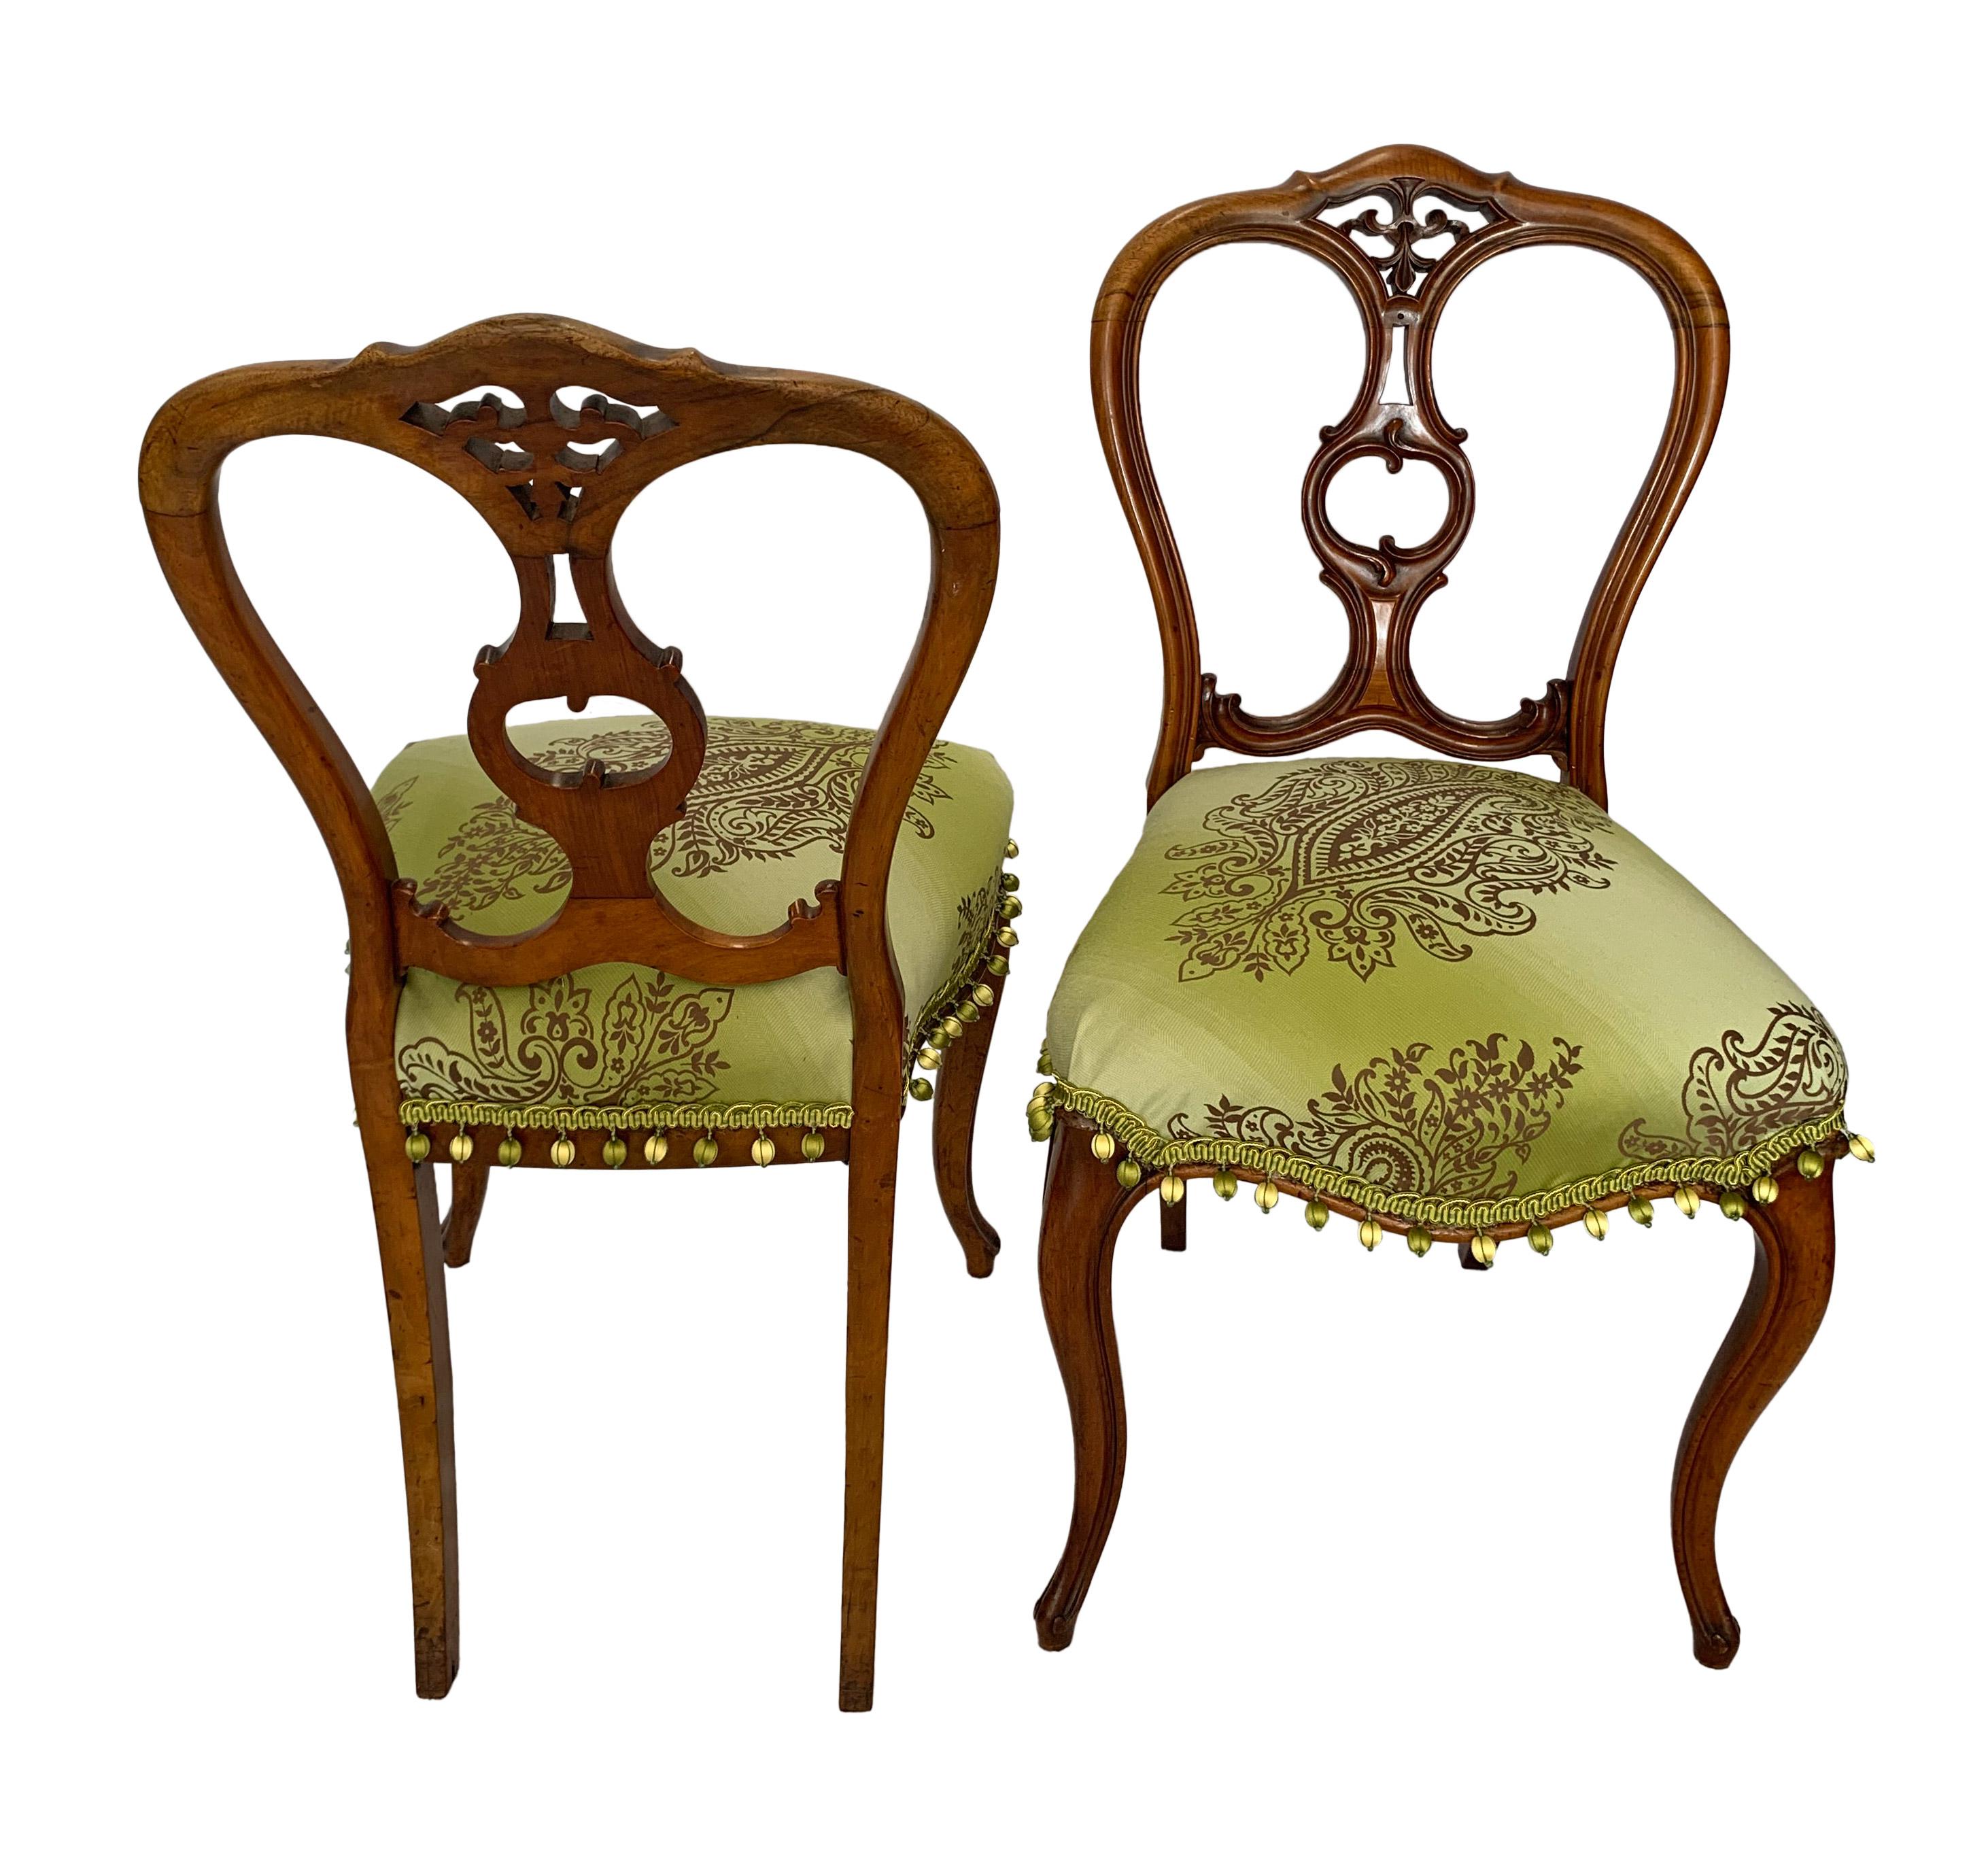 Fabric Early 20th Century Petite Victorian Style Elegantly Sculpted Balloon Back Chairs For Sale